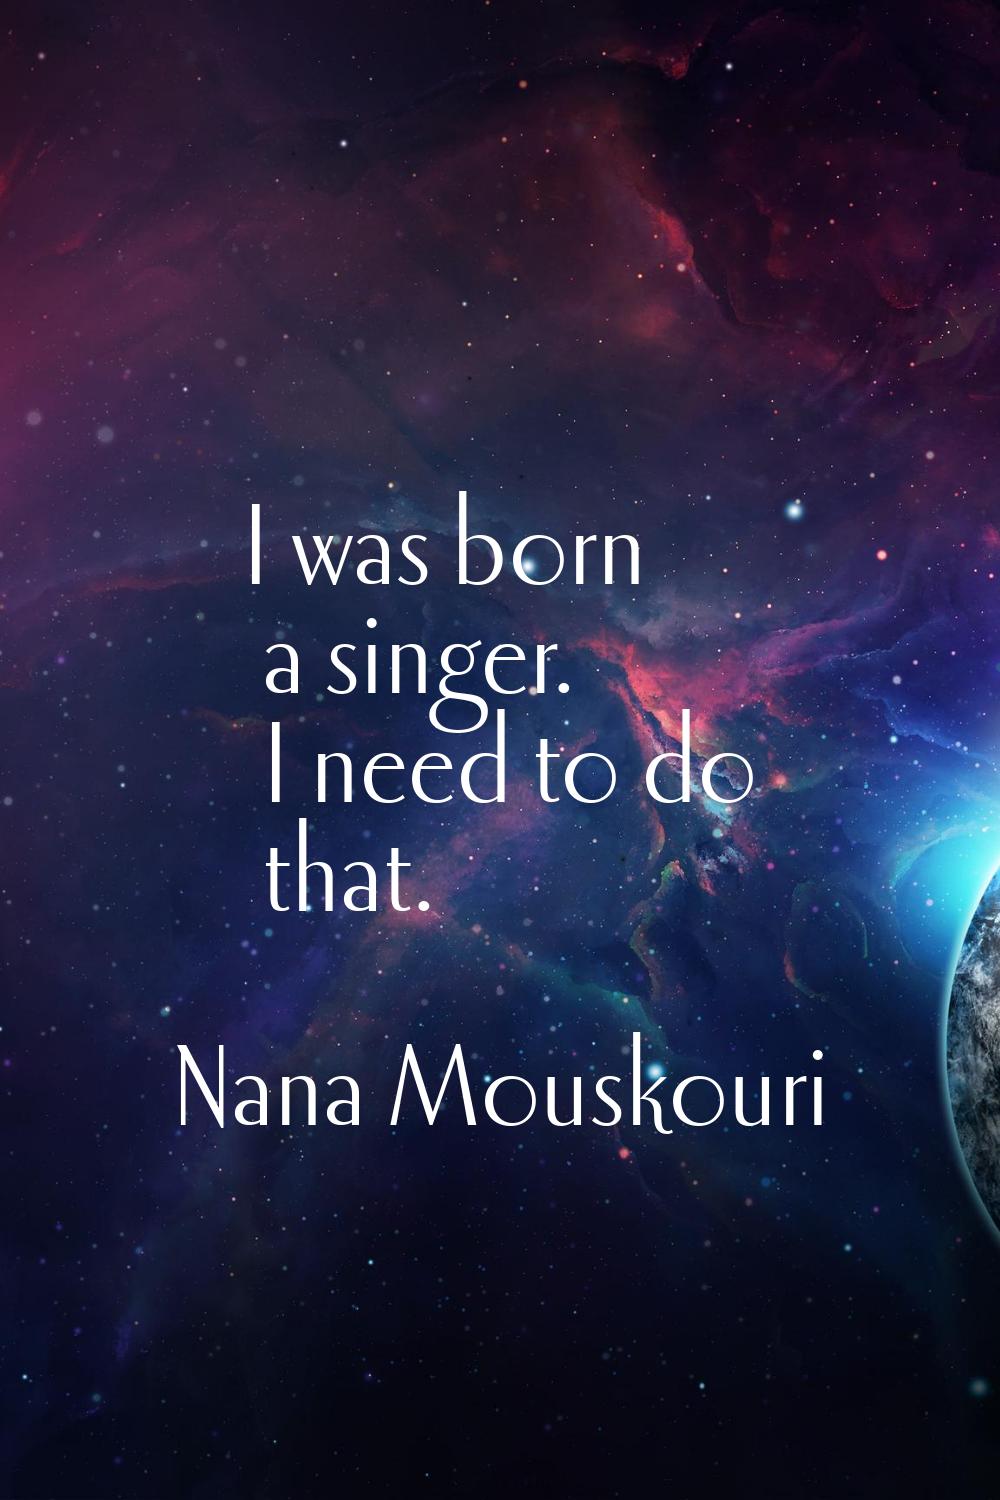 I was born a singer. I need to do that.